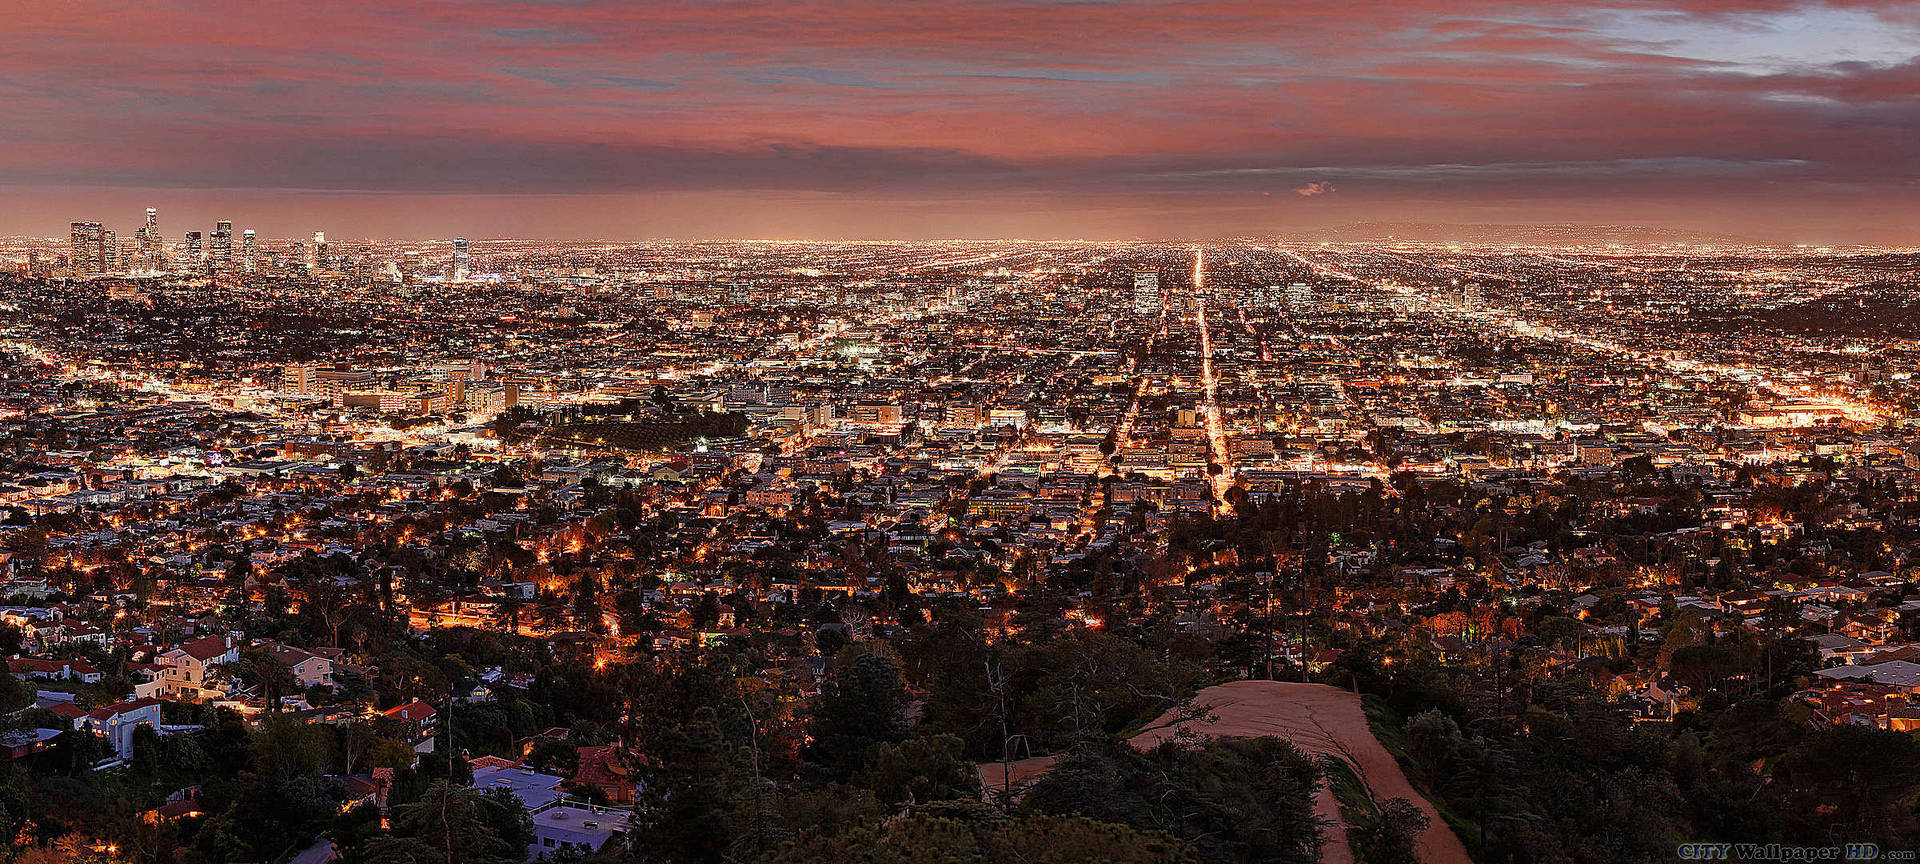 2401X1080 Los Angeles Wallpaper and Background